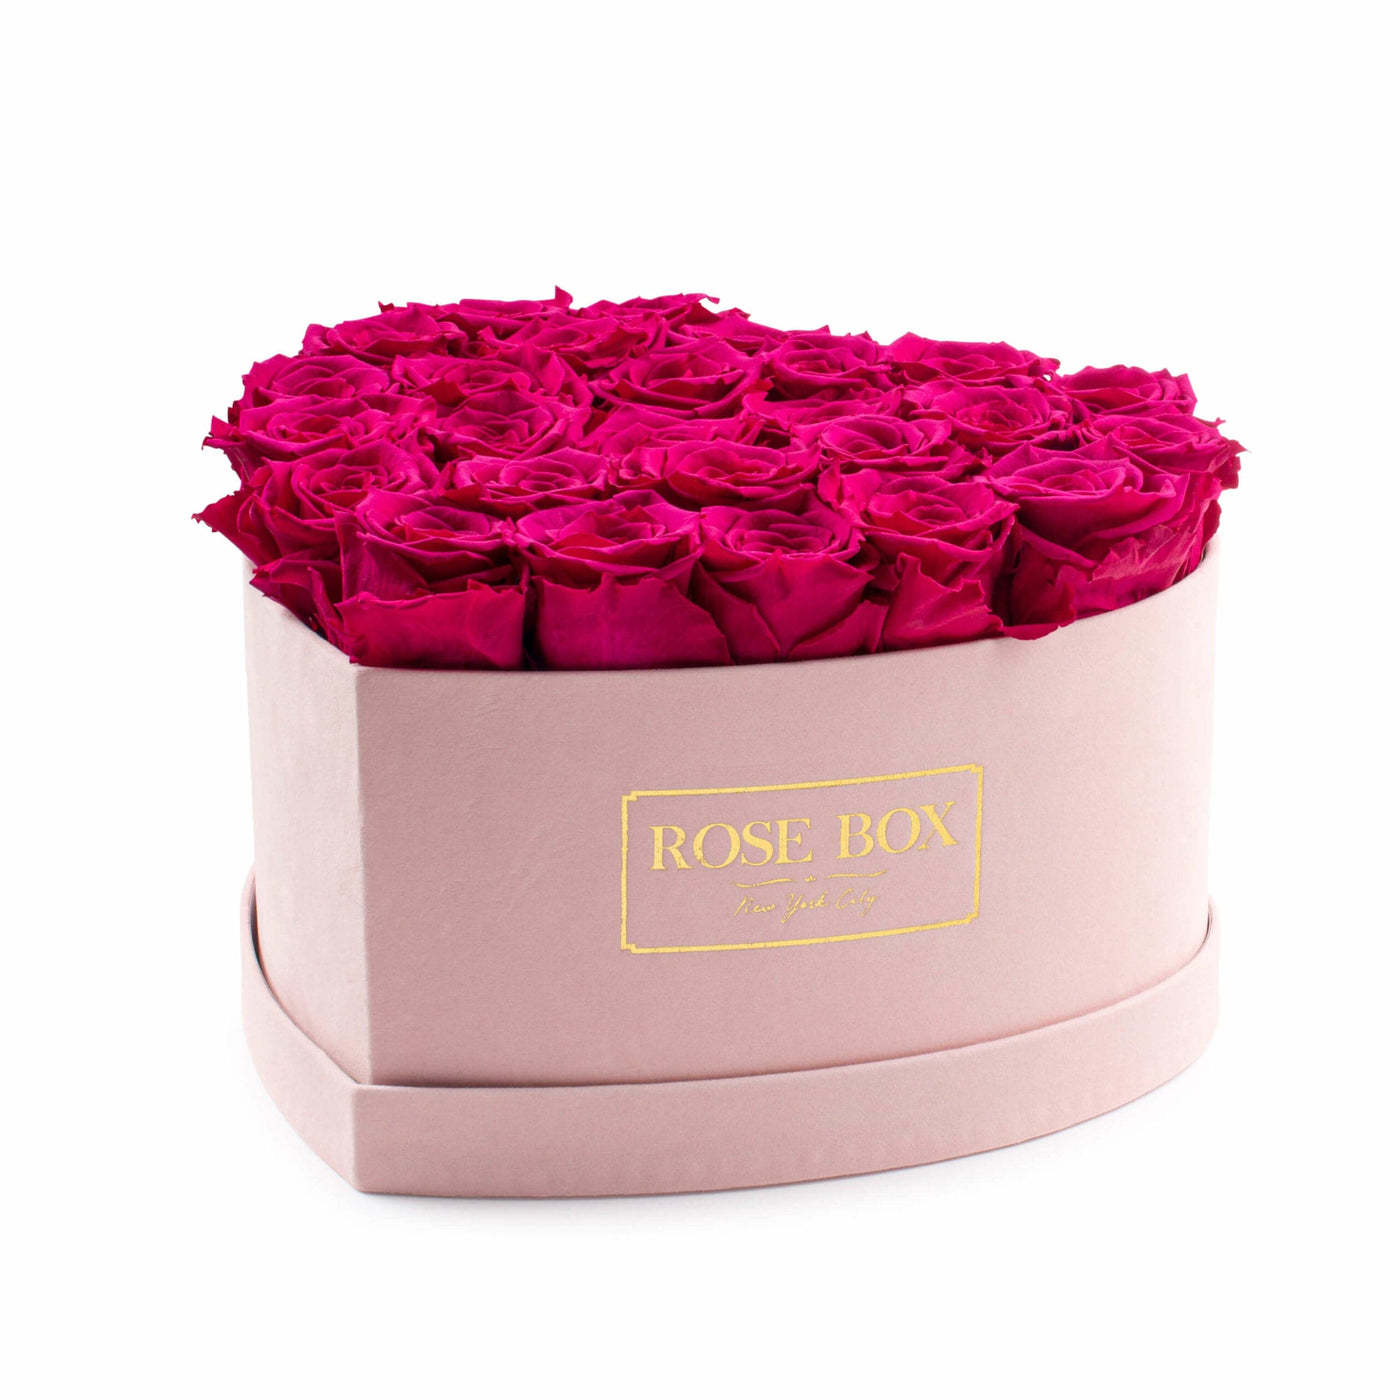 Large Pink Heart Box with Ruby Pink Roses